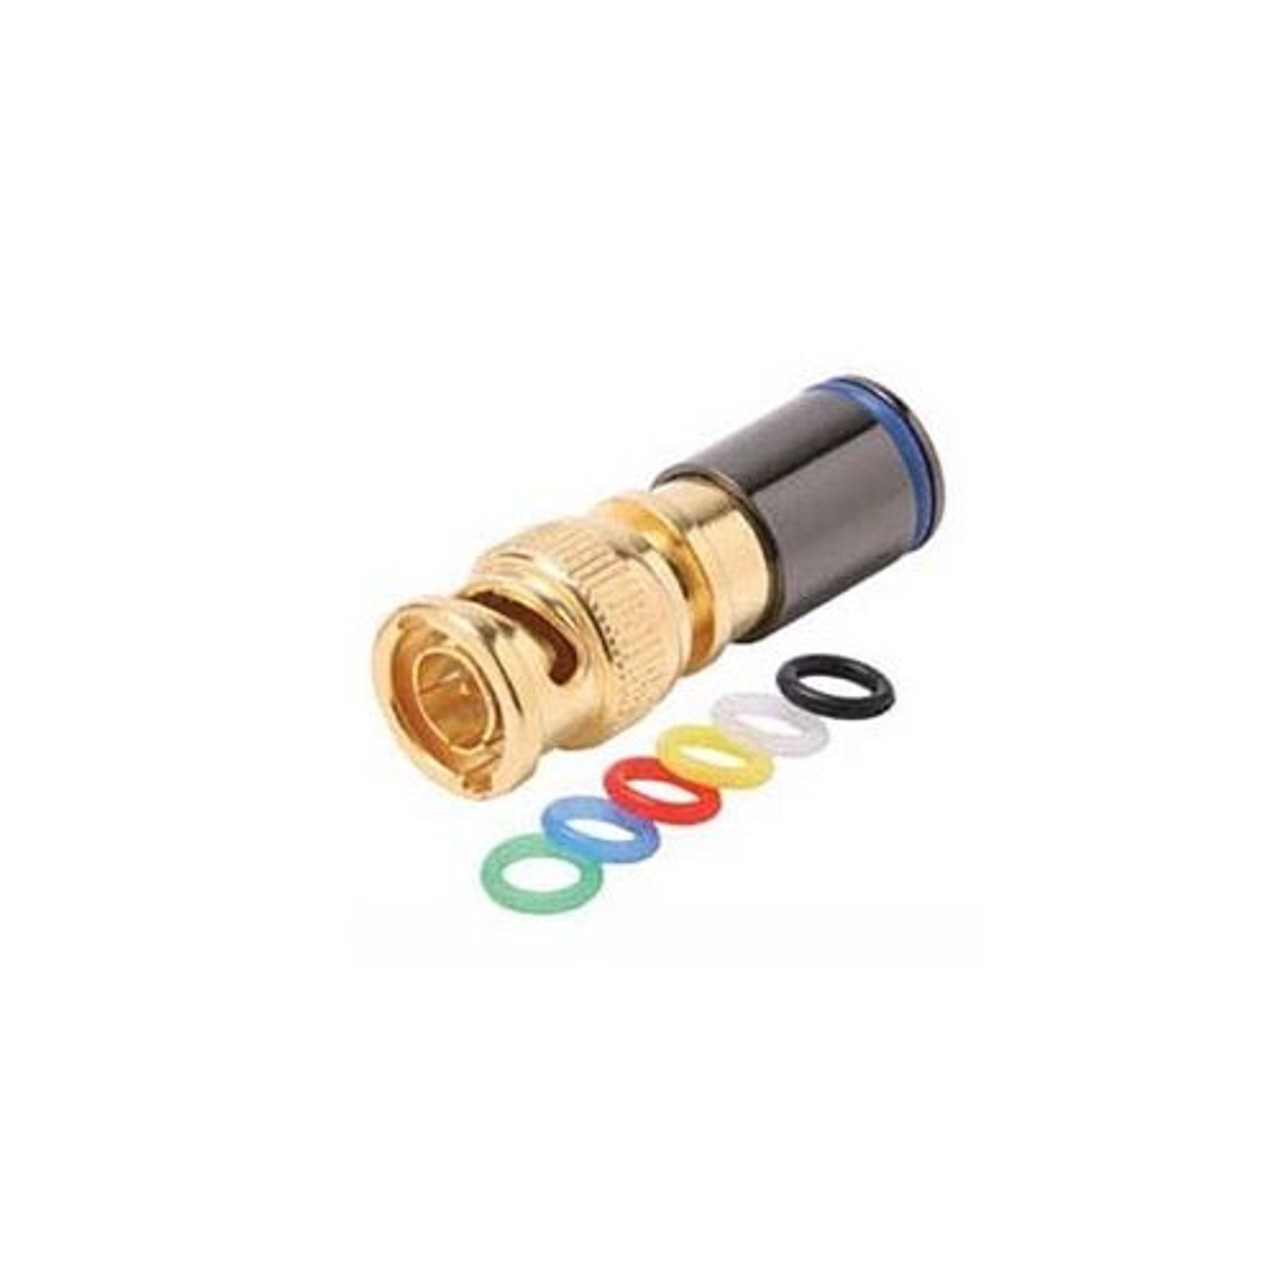 Steren 200-088 BNC Quad Compression Connector RG-6 Gold Plate with 6 Color Bands Permaseal II Coaxial Cable Snap-On Line Plug Adapter, RF Digital Audio Video RG6 Component Connection, Part # 200088